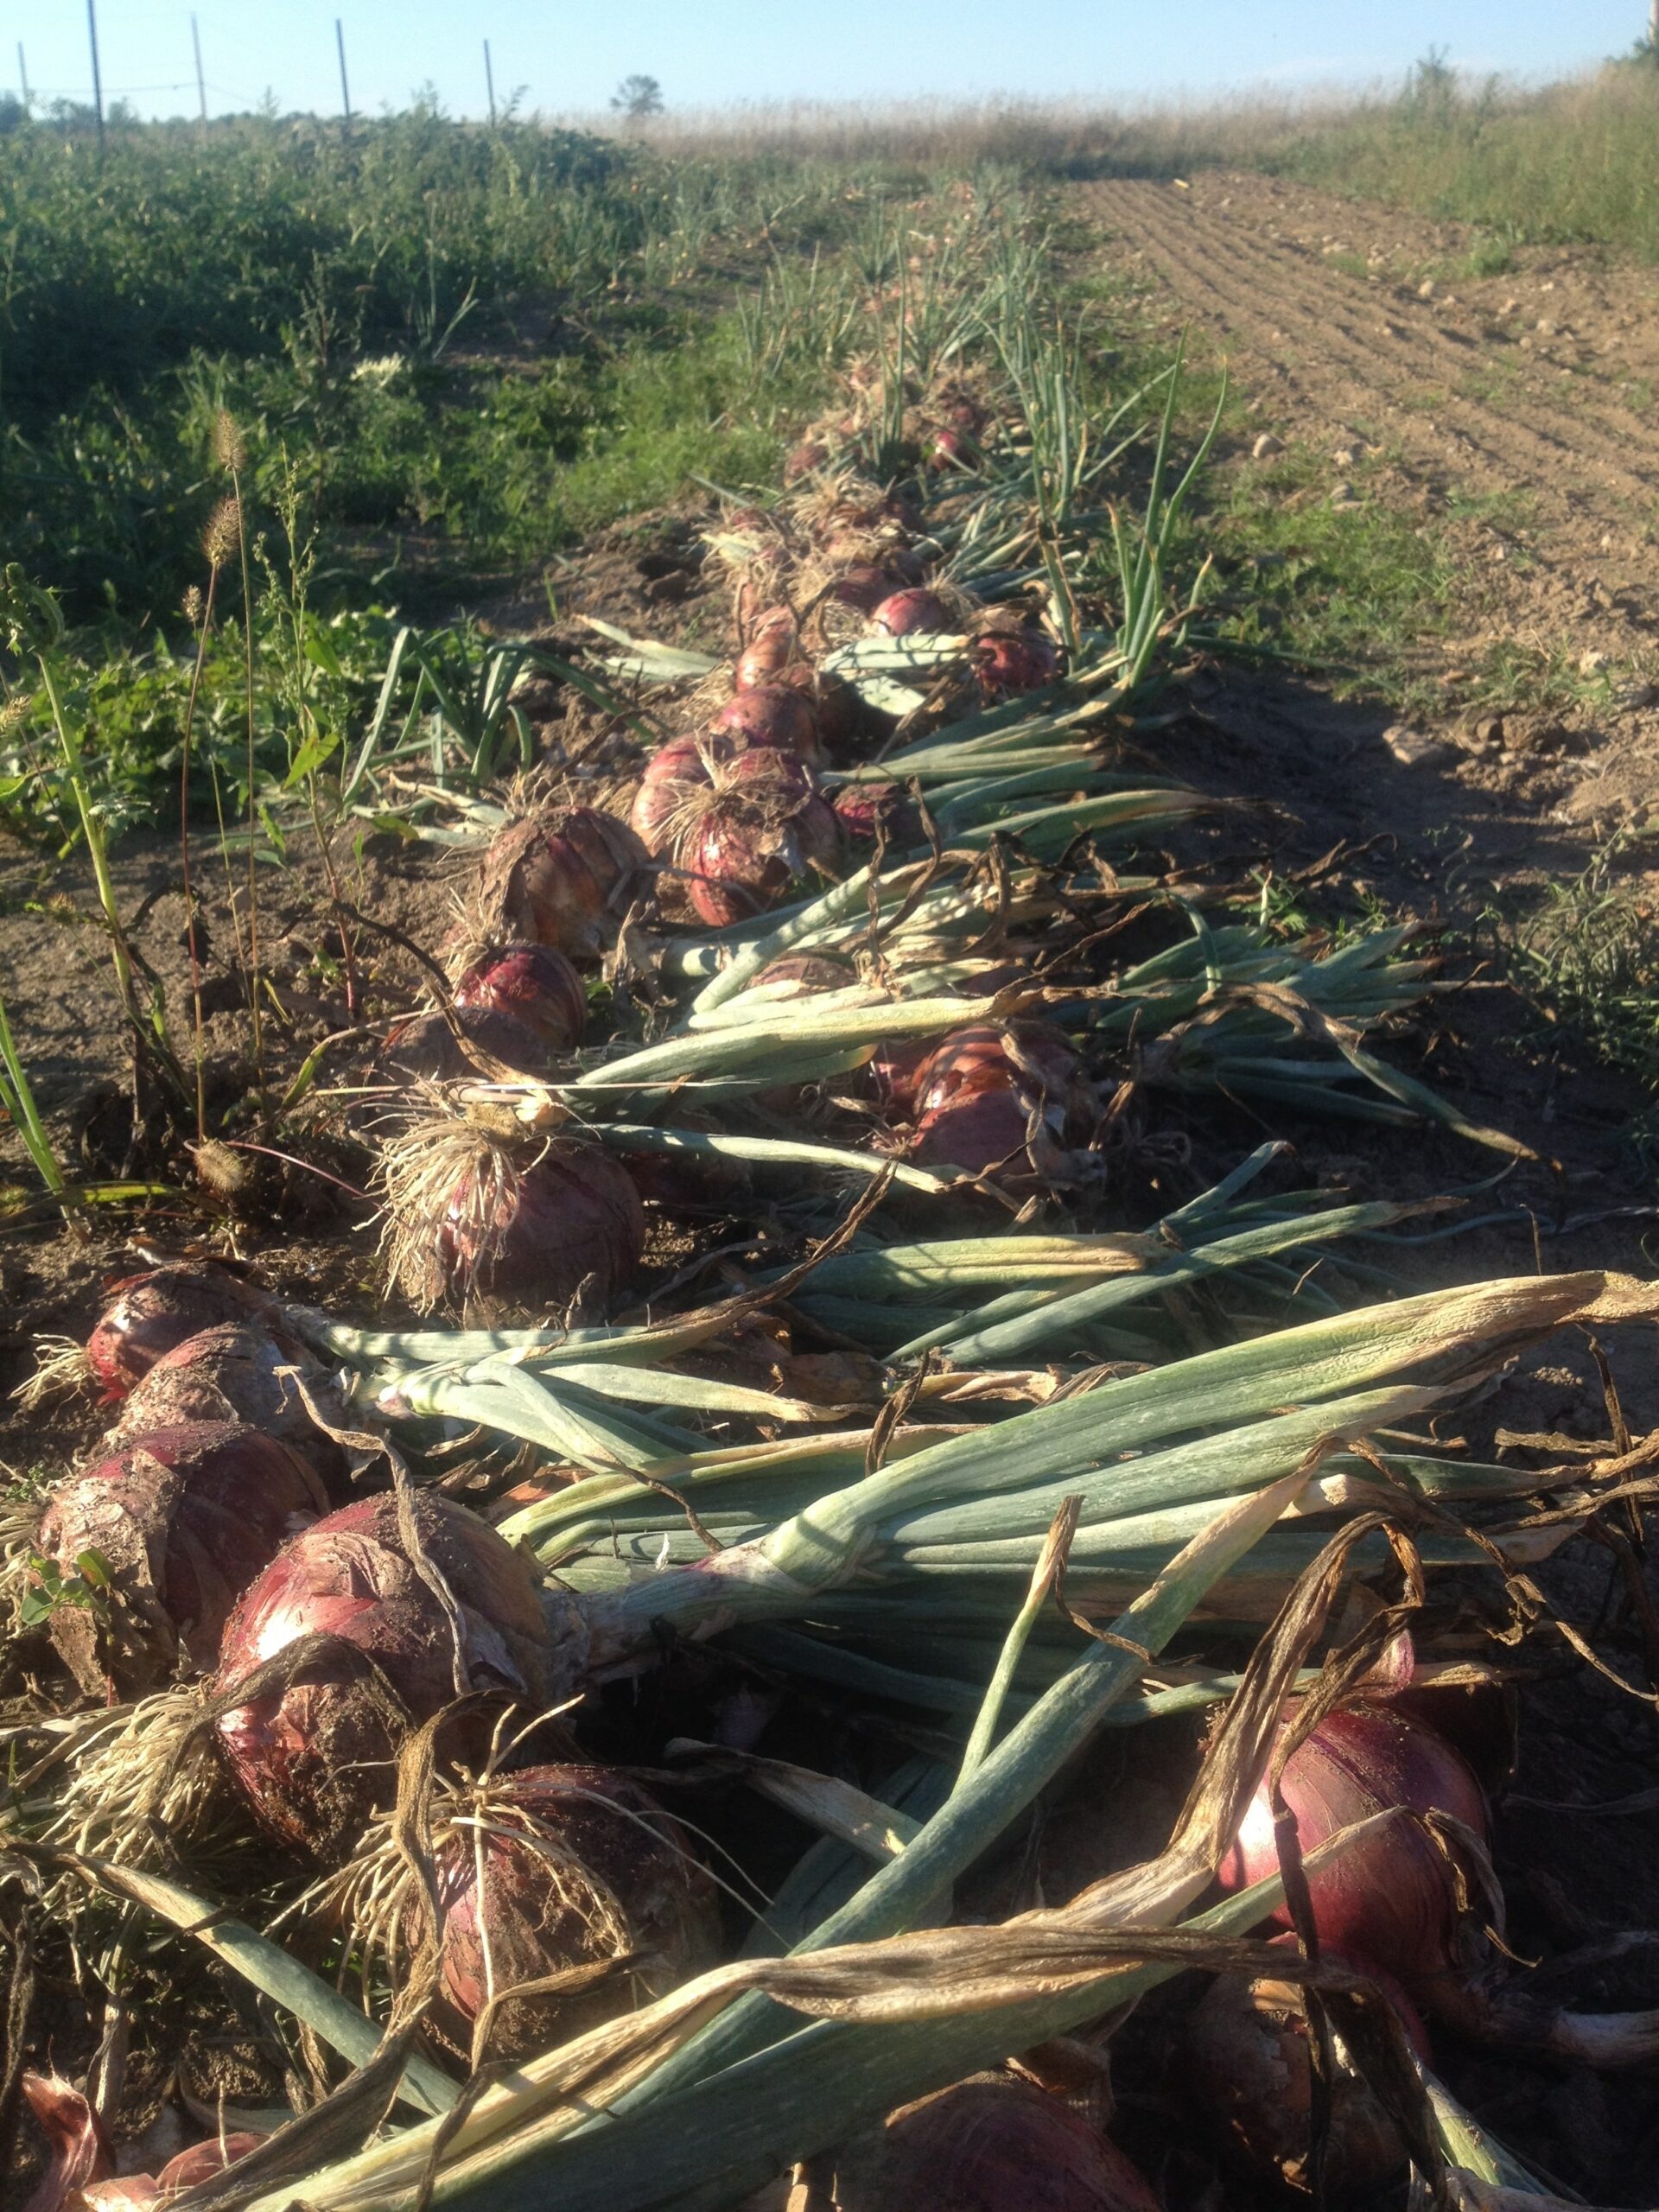 onion bed scaled - To Bean or not to Bean? — Knuckle Down News, Week 13